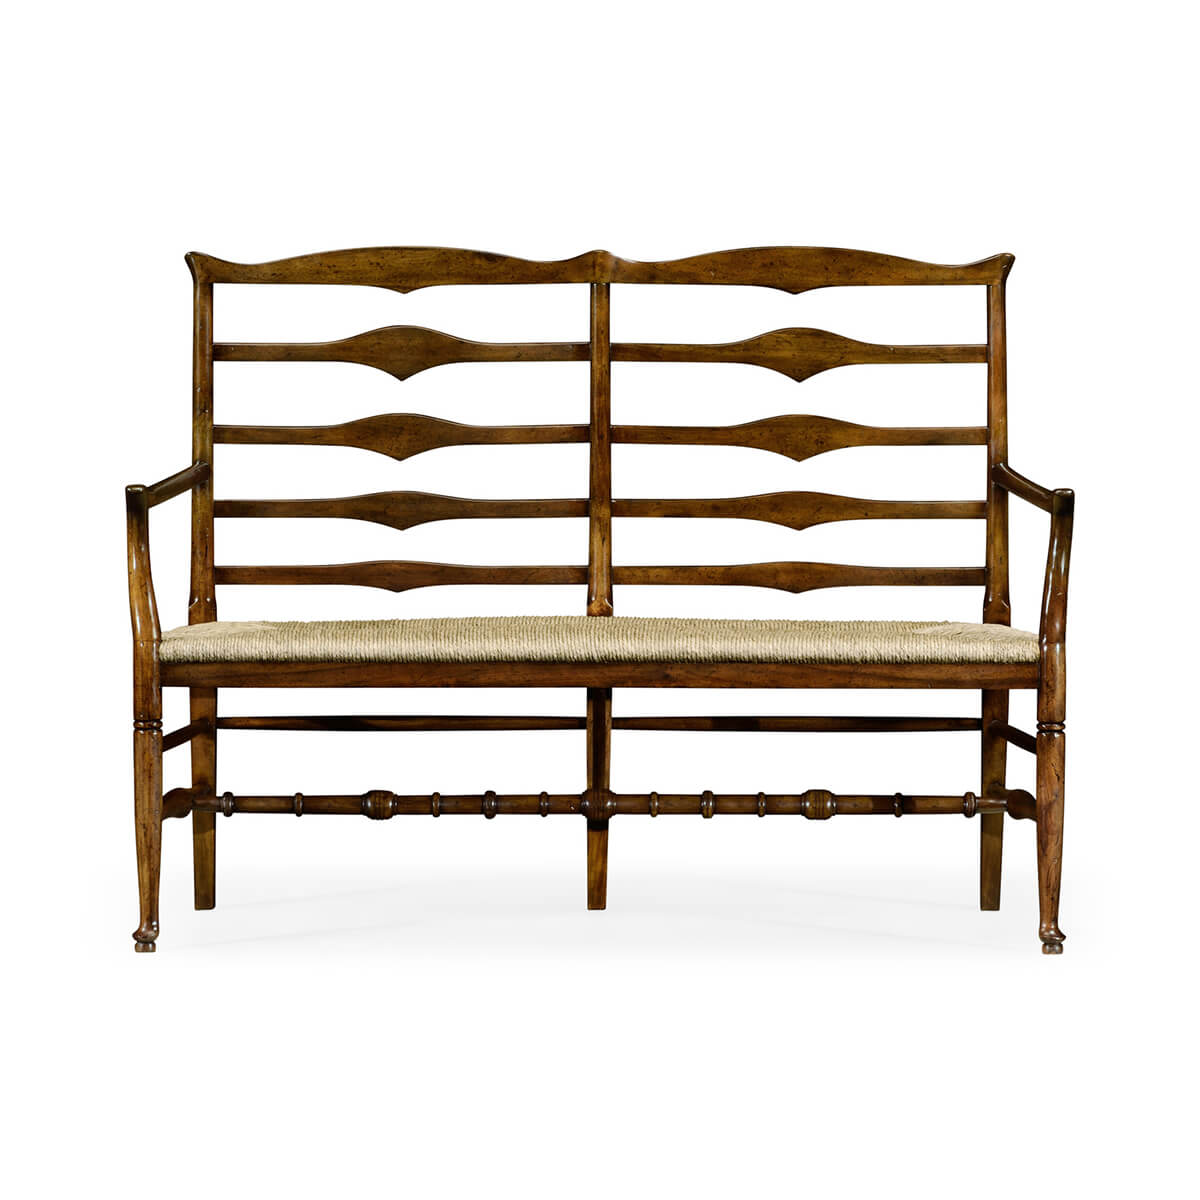 Country style Ladder Back Bench - English Georgian America